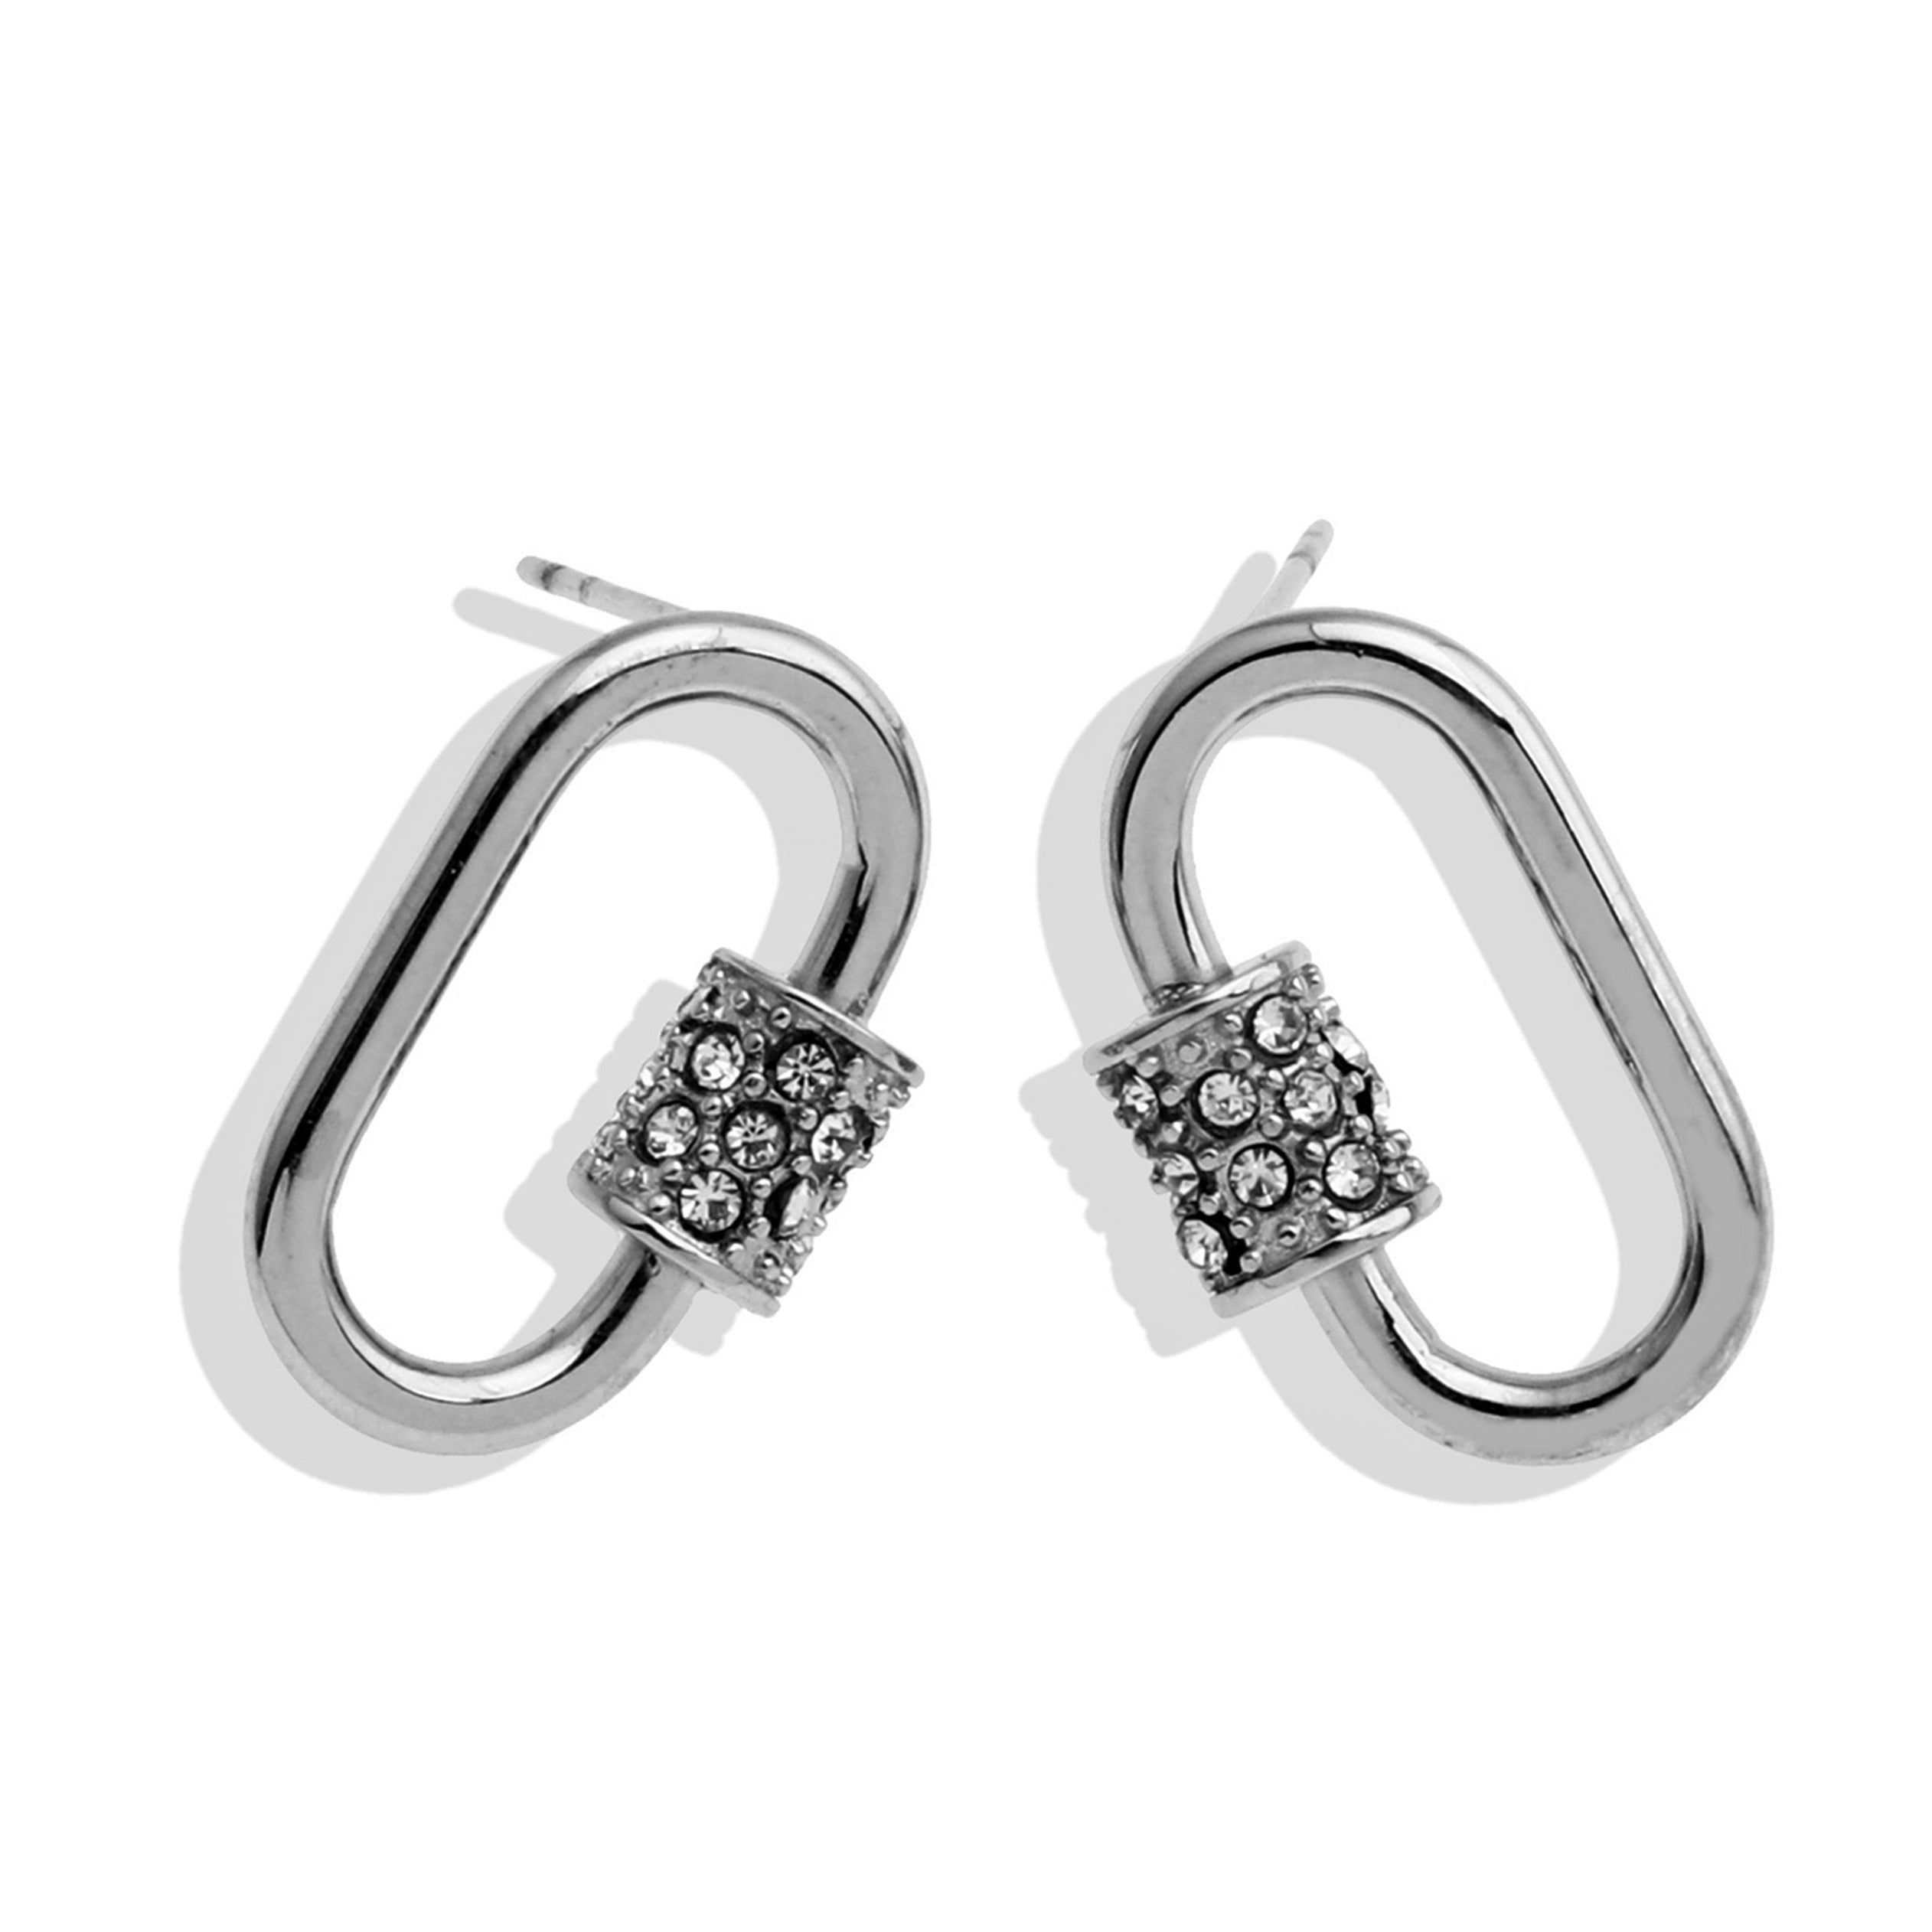 LENNON Silver Carabiner Earrings with Pavé Zirconia Accent